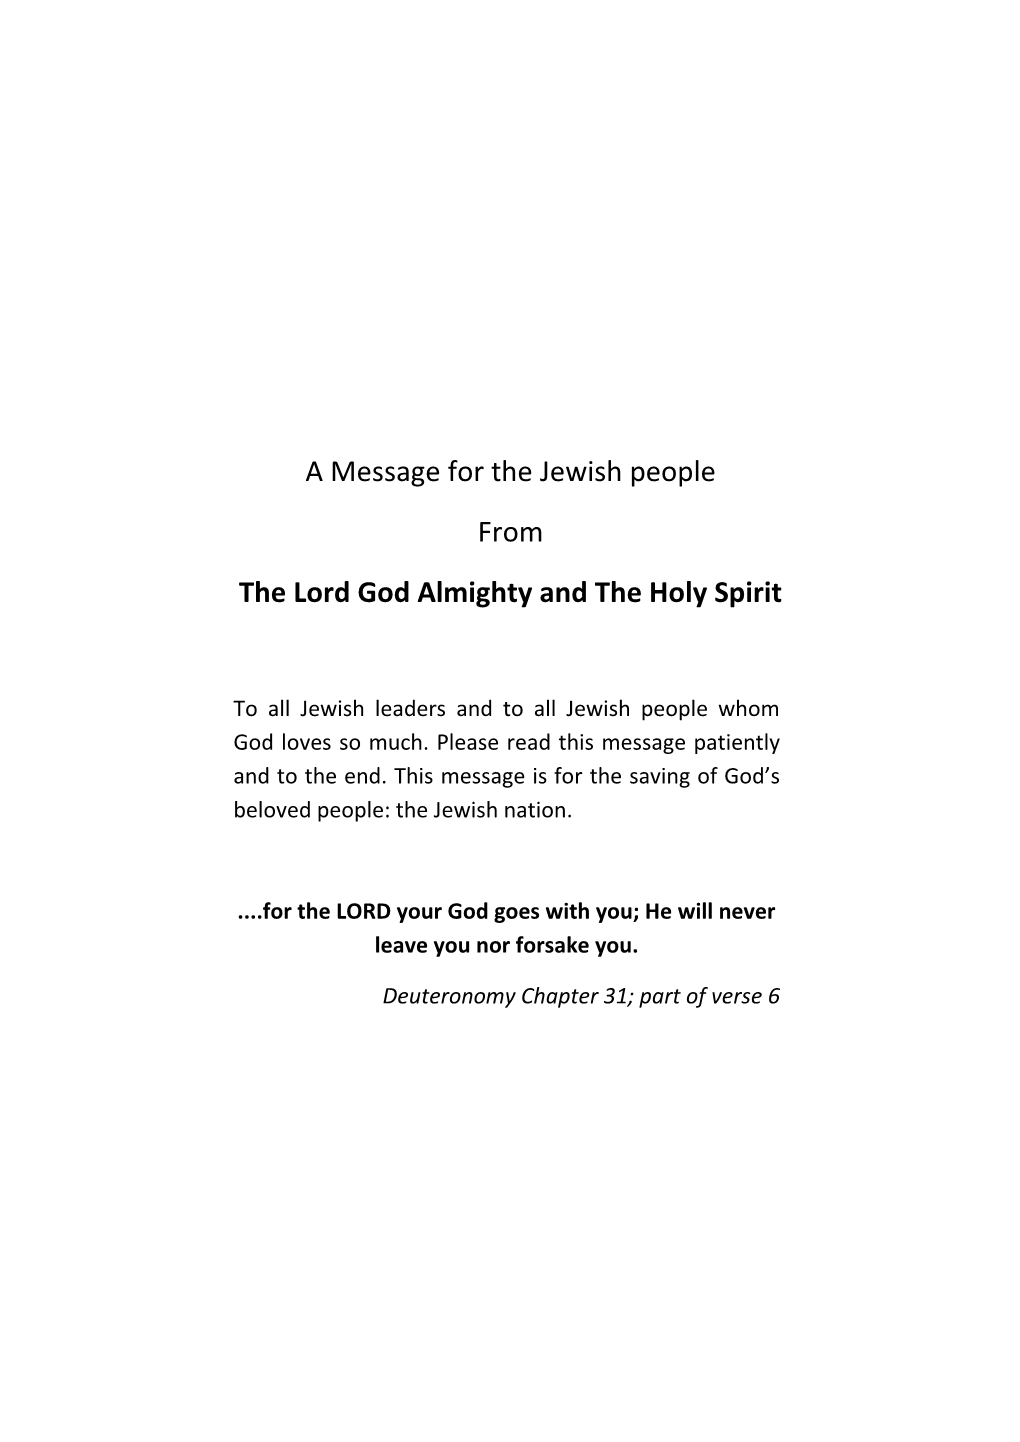 A Message for the Jewish People from the Lord God Almighty and the Holy Spirit